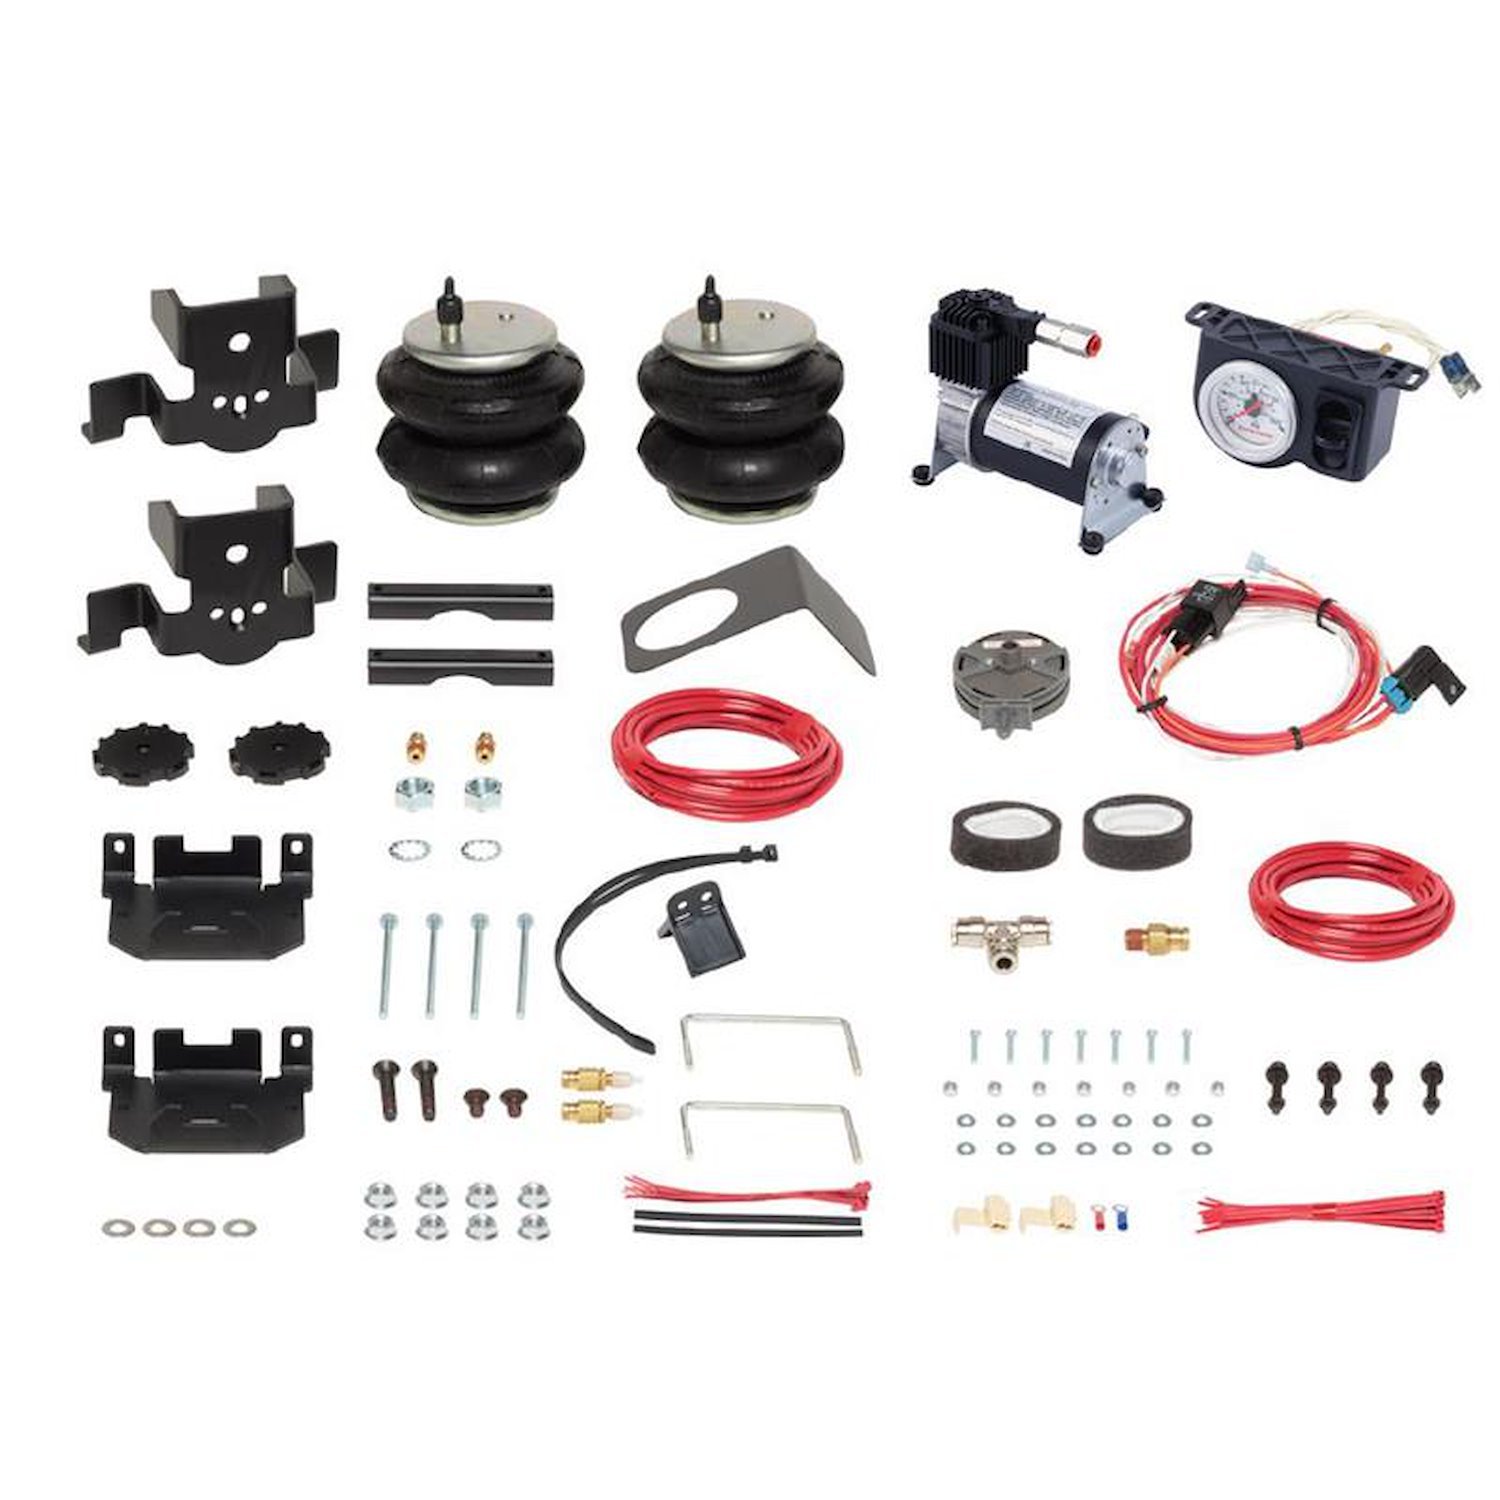 Ride-Rite Analog All-In-One Spring Kit for 1999-2004/2008-2010 Ford F-250/F-350